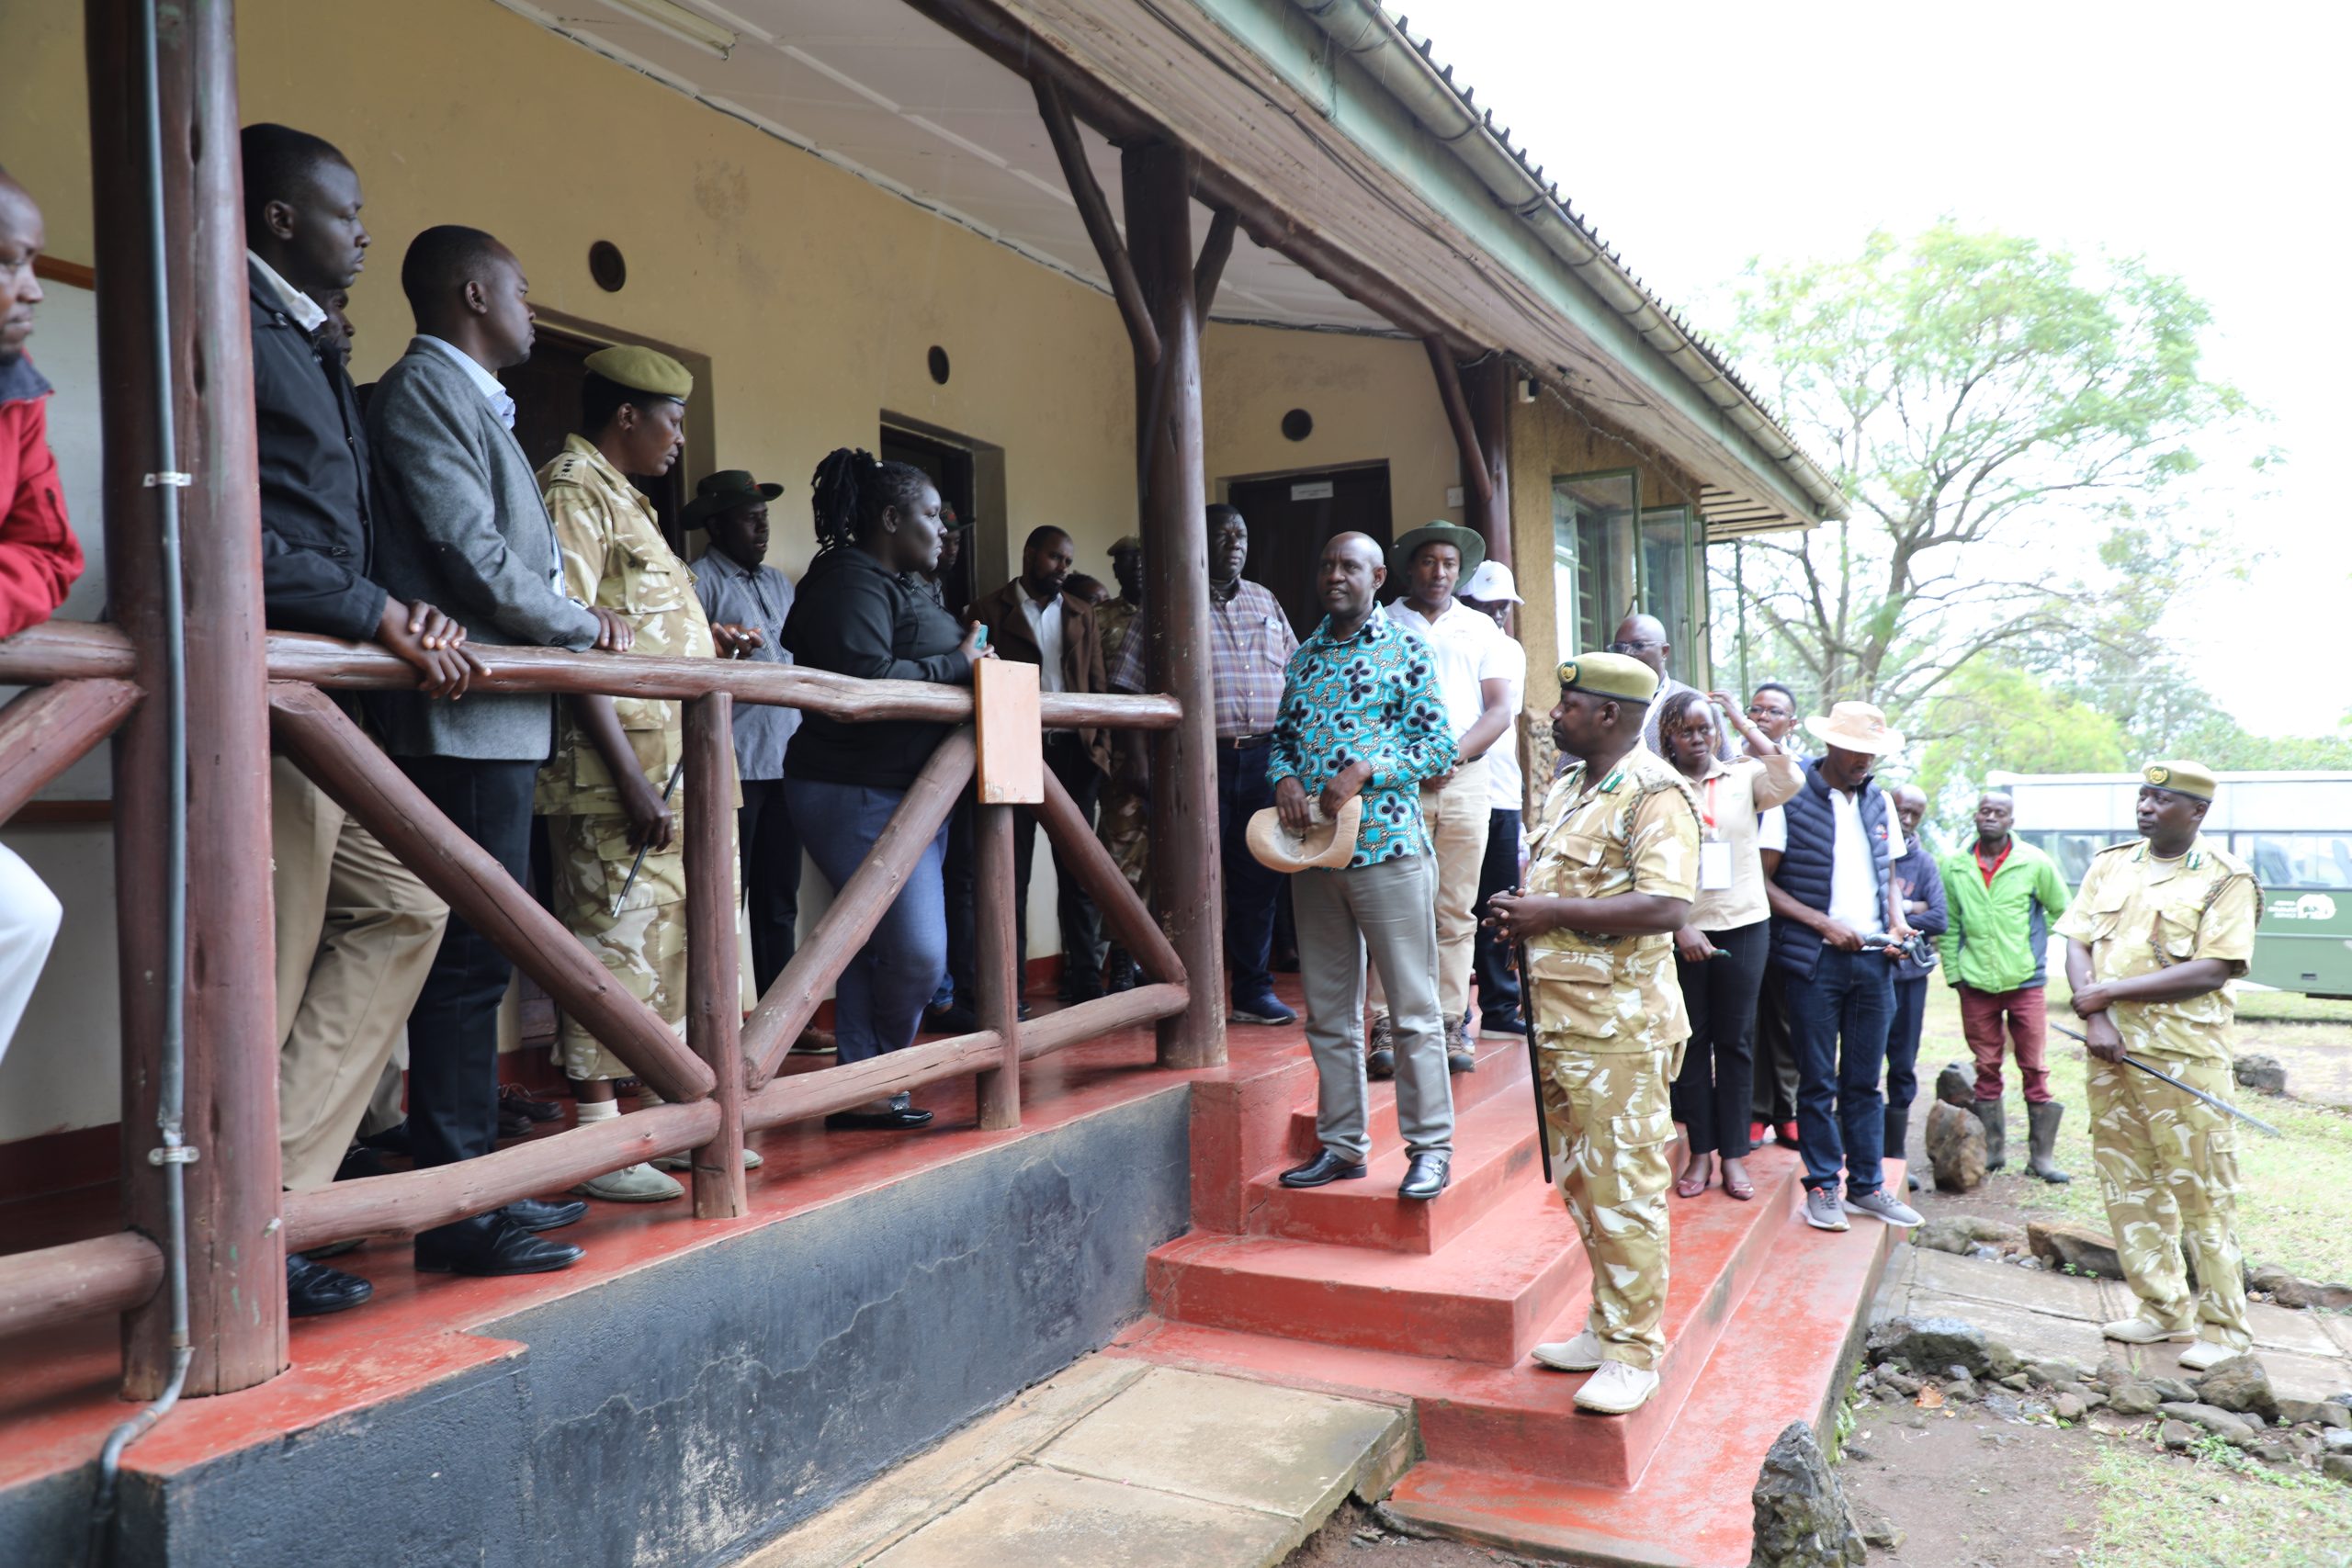 PS Ololtuaa (In floral shirt) address Ministry officials at Ruma National Park